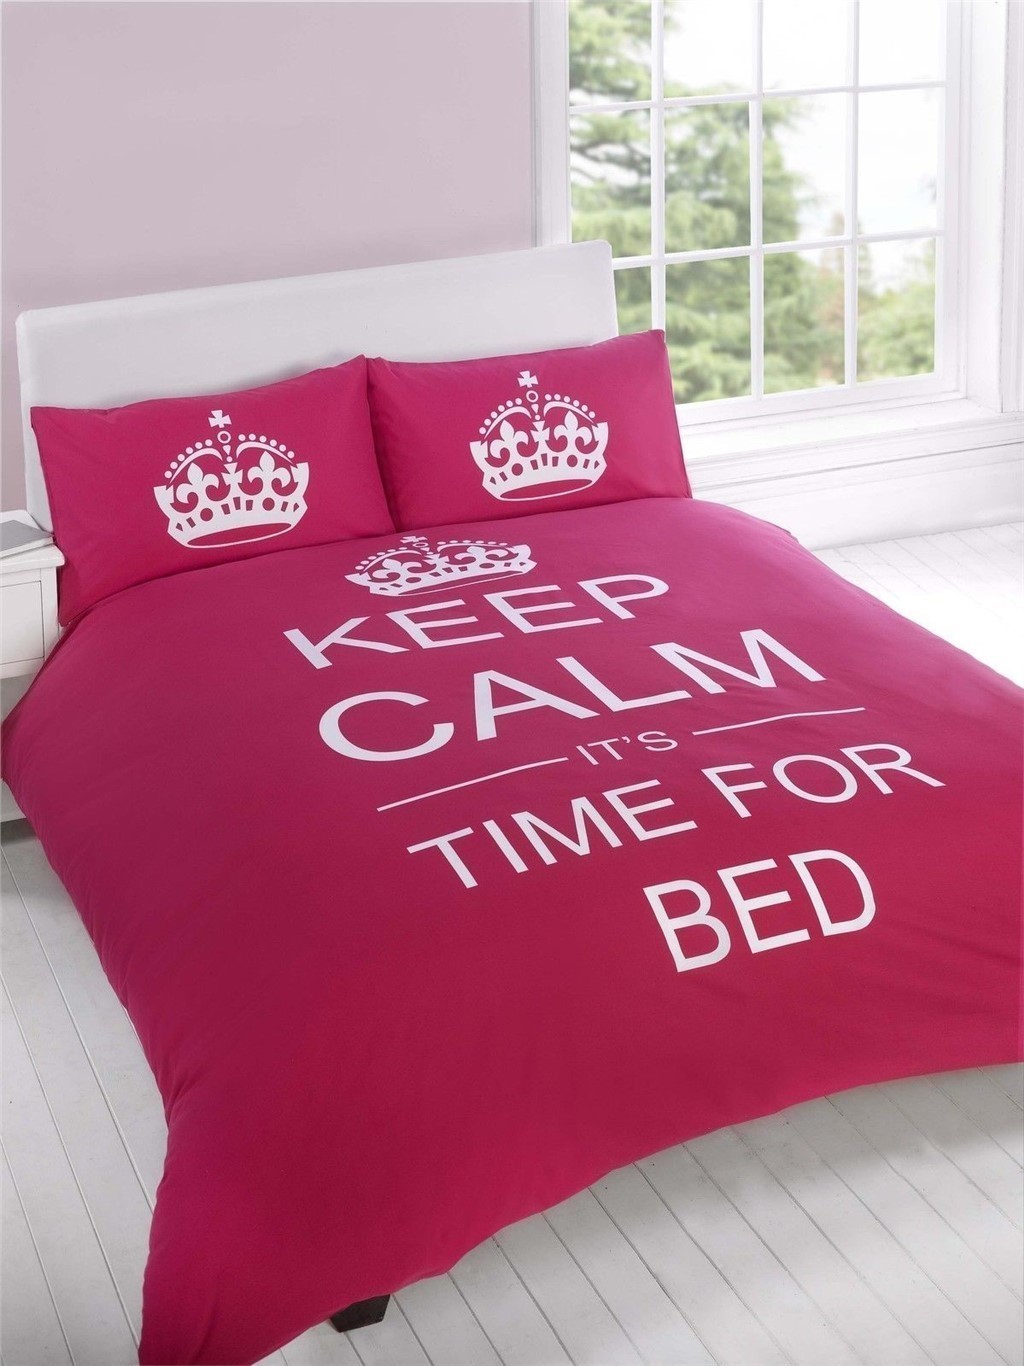 KEEP CALM Time for Bed Reversible Bedding Duvet Quilt Cover Set with Pillowcases 